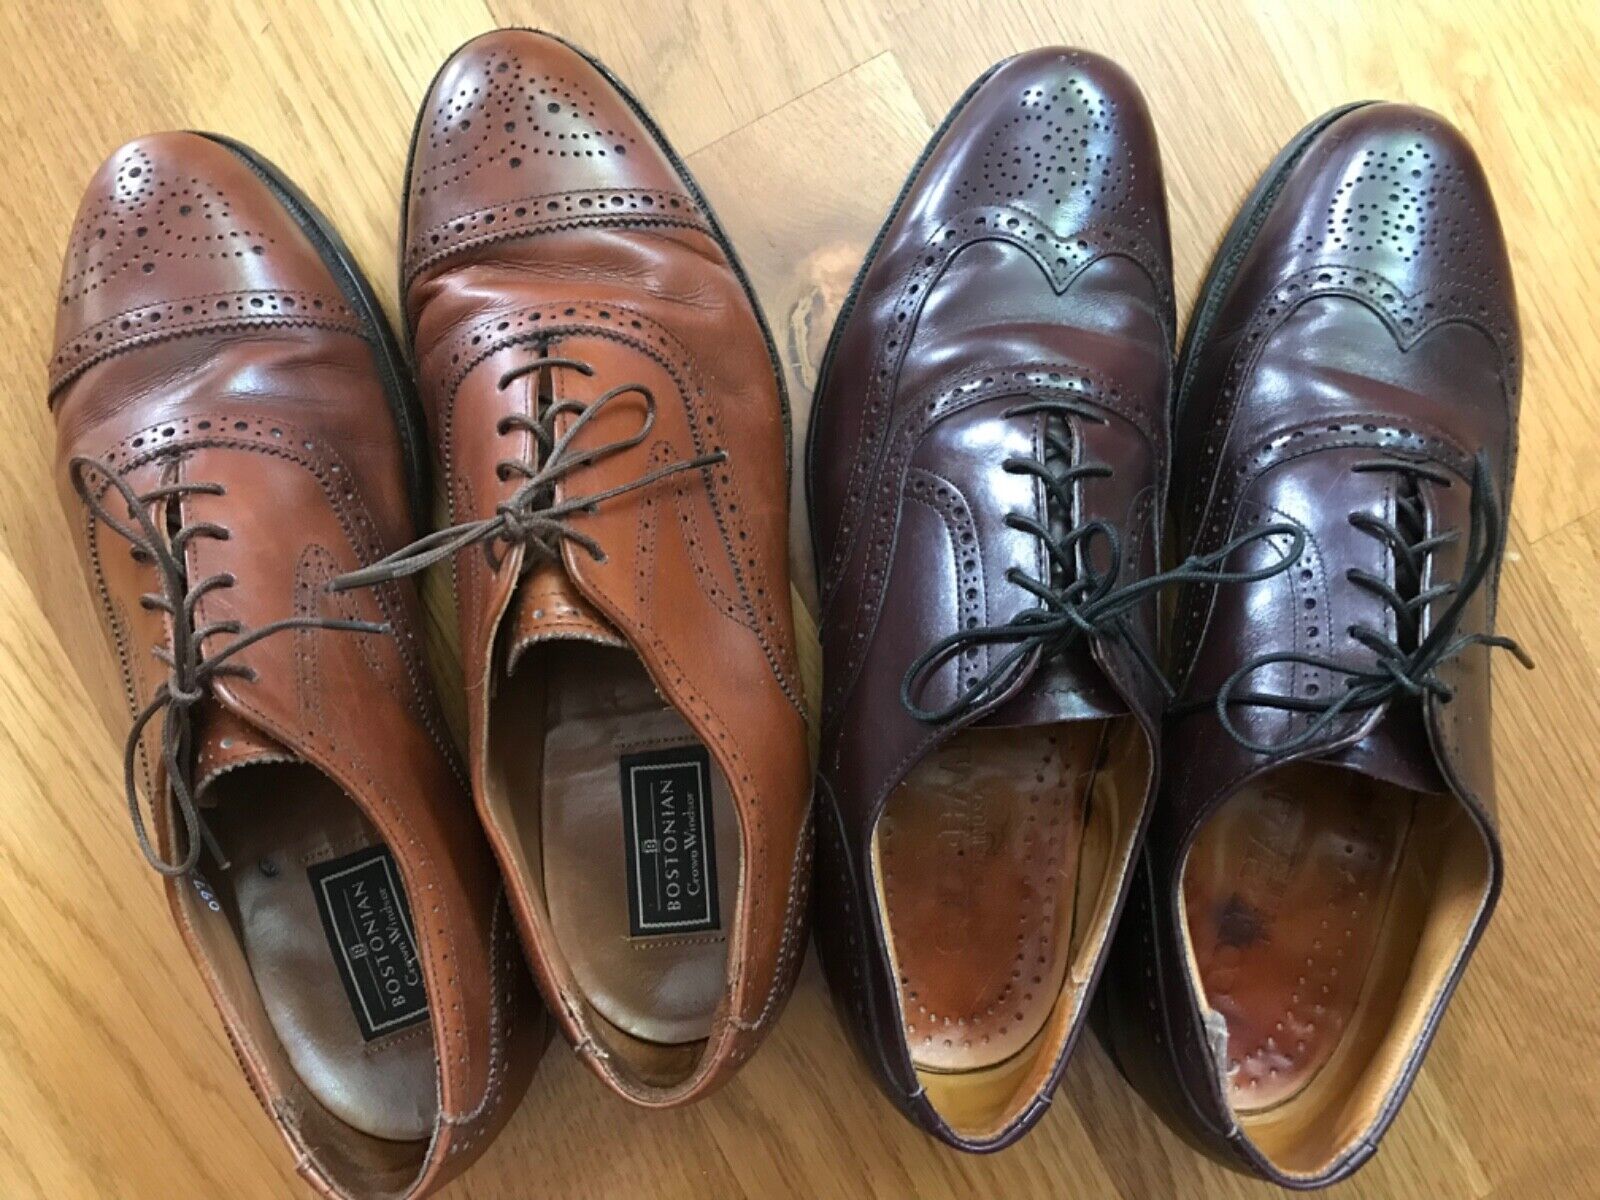 (2 pairs) classic men’s formal leather Brogue shoes brown/burgundy size 9 1/2  Bostonian, Cole & Haan